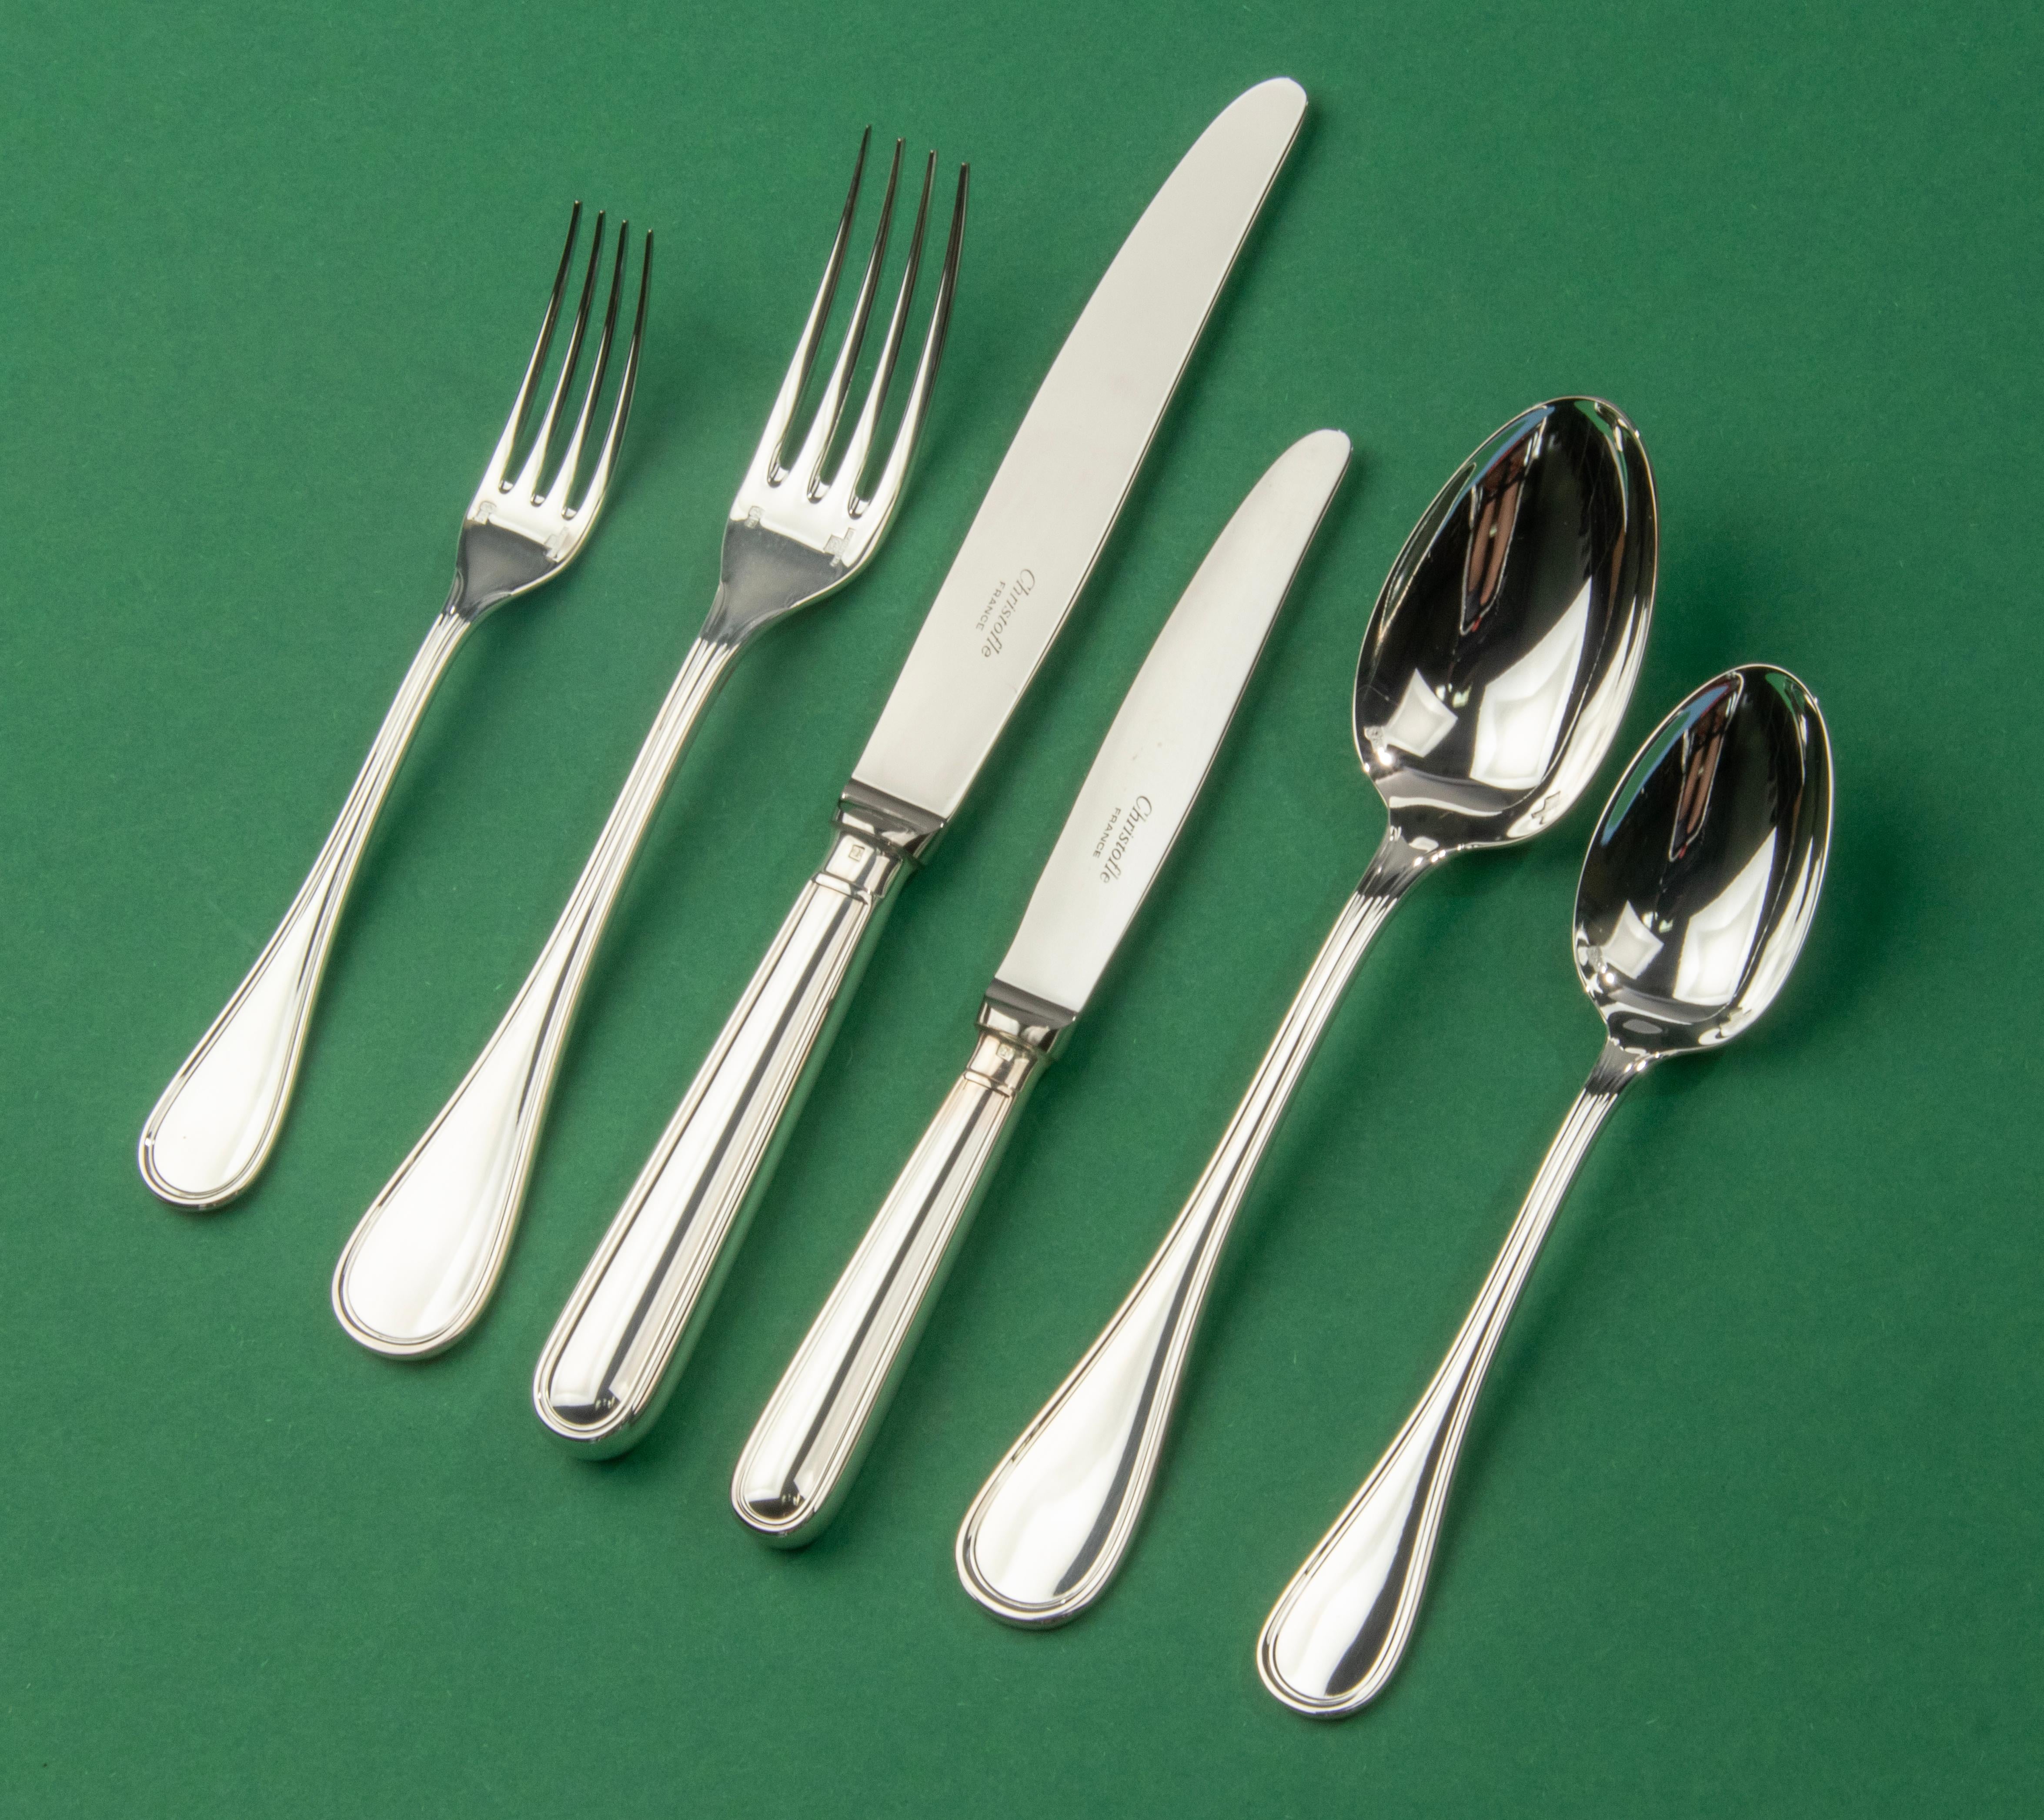 A beautiful silver plated set of tableware for 12 persons, made by the French brand Christofle, from the series Albi. This set is in new condition, all pieces are packed and sealed in original Christofle blisters. Only a few pieces were unpacked for